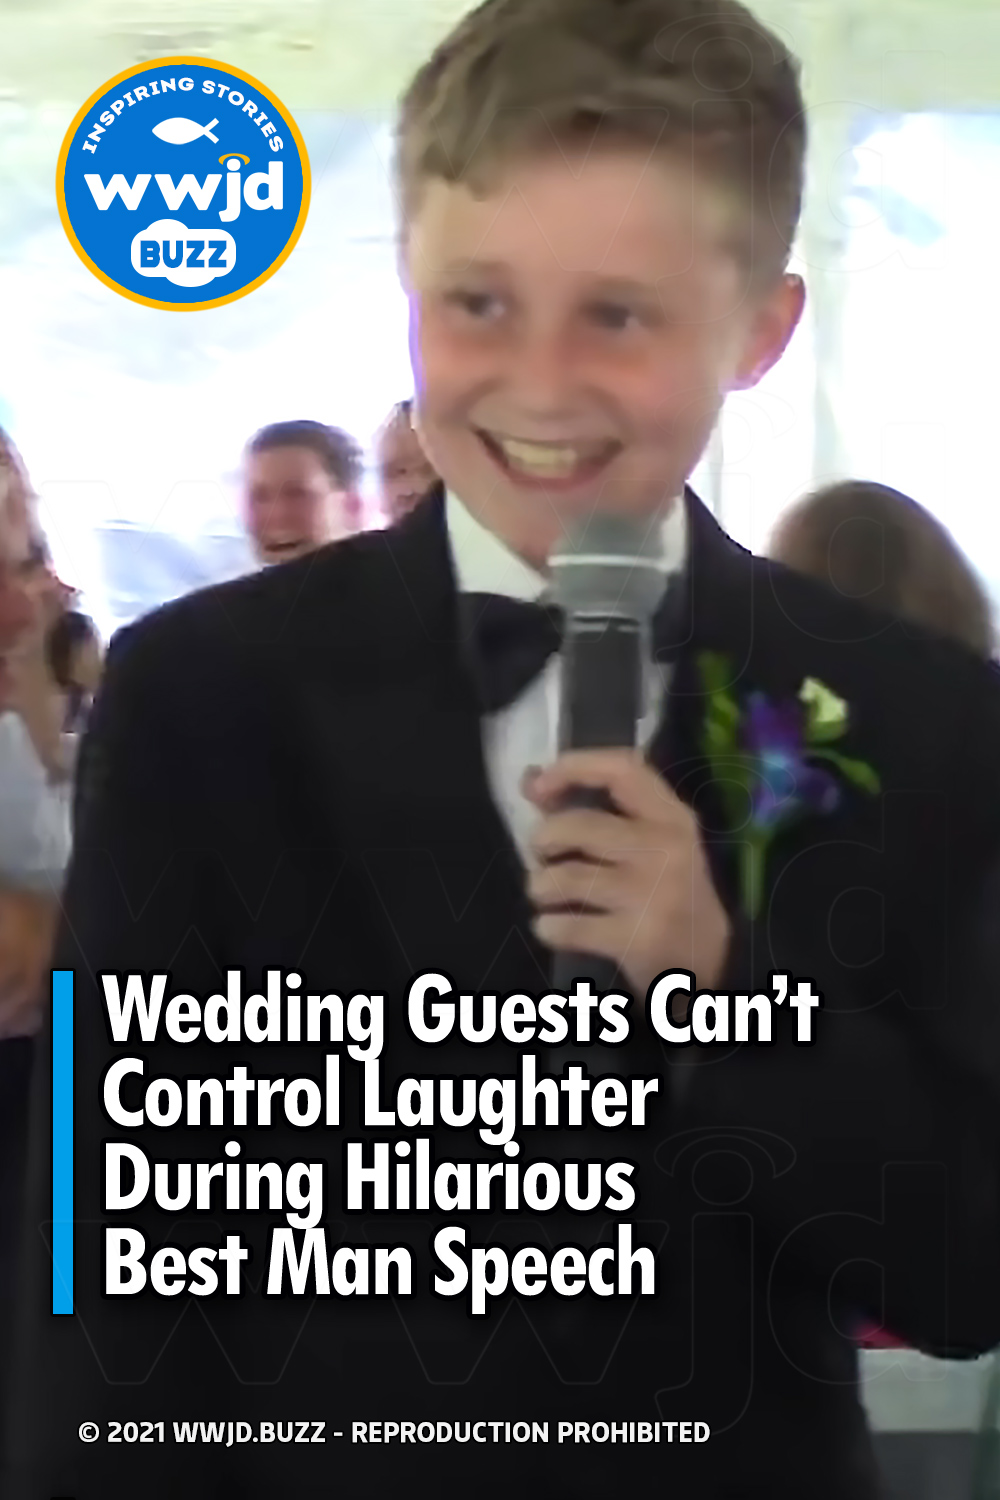 Wedding Guests Can’t Control Laughter During Hilarious Best Man Speech